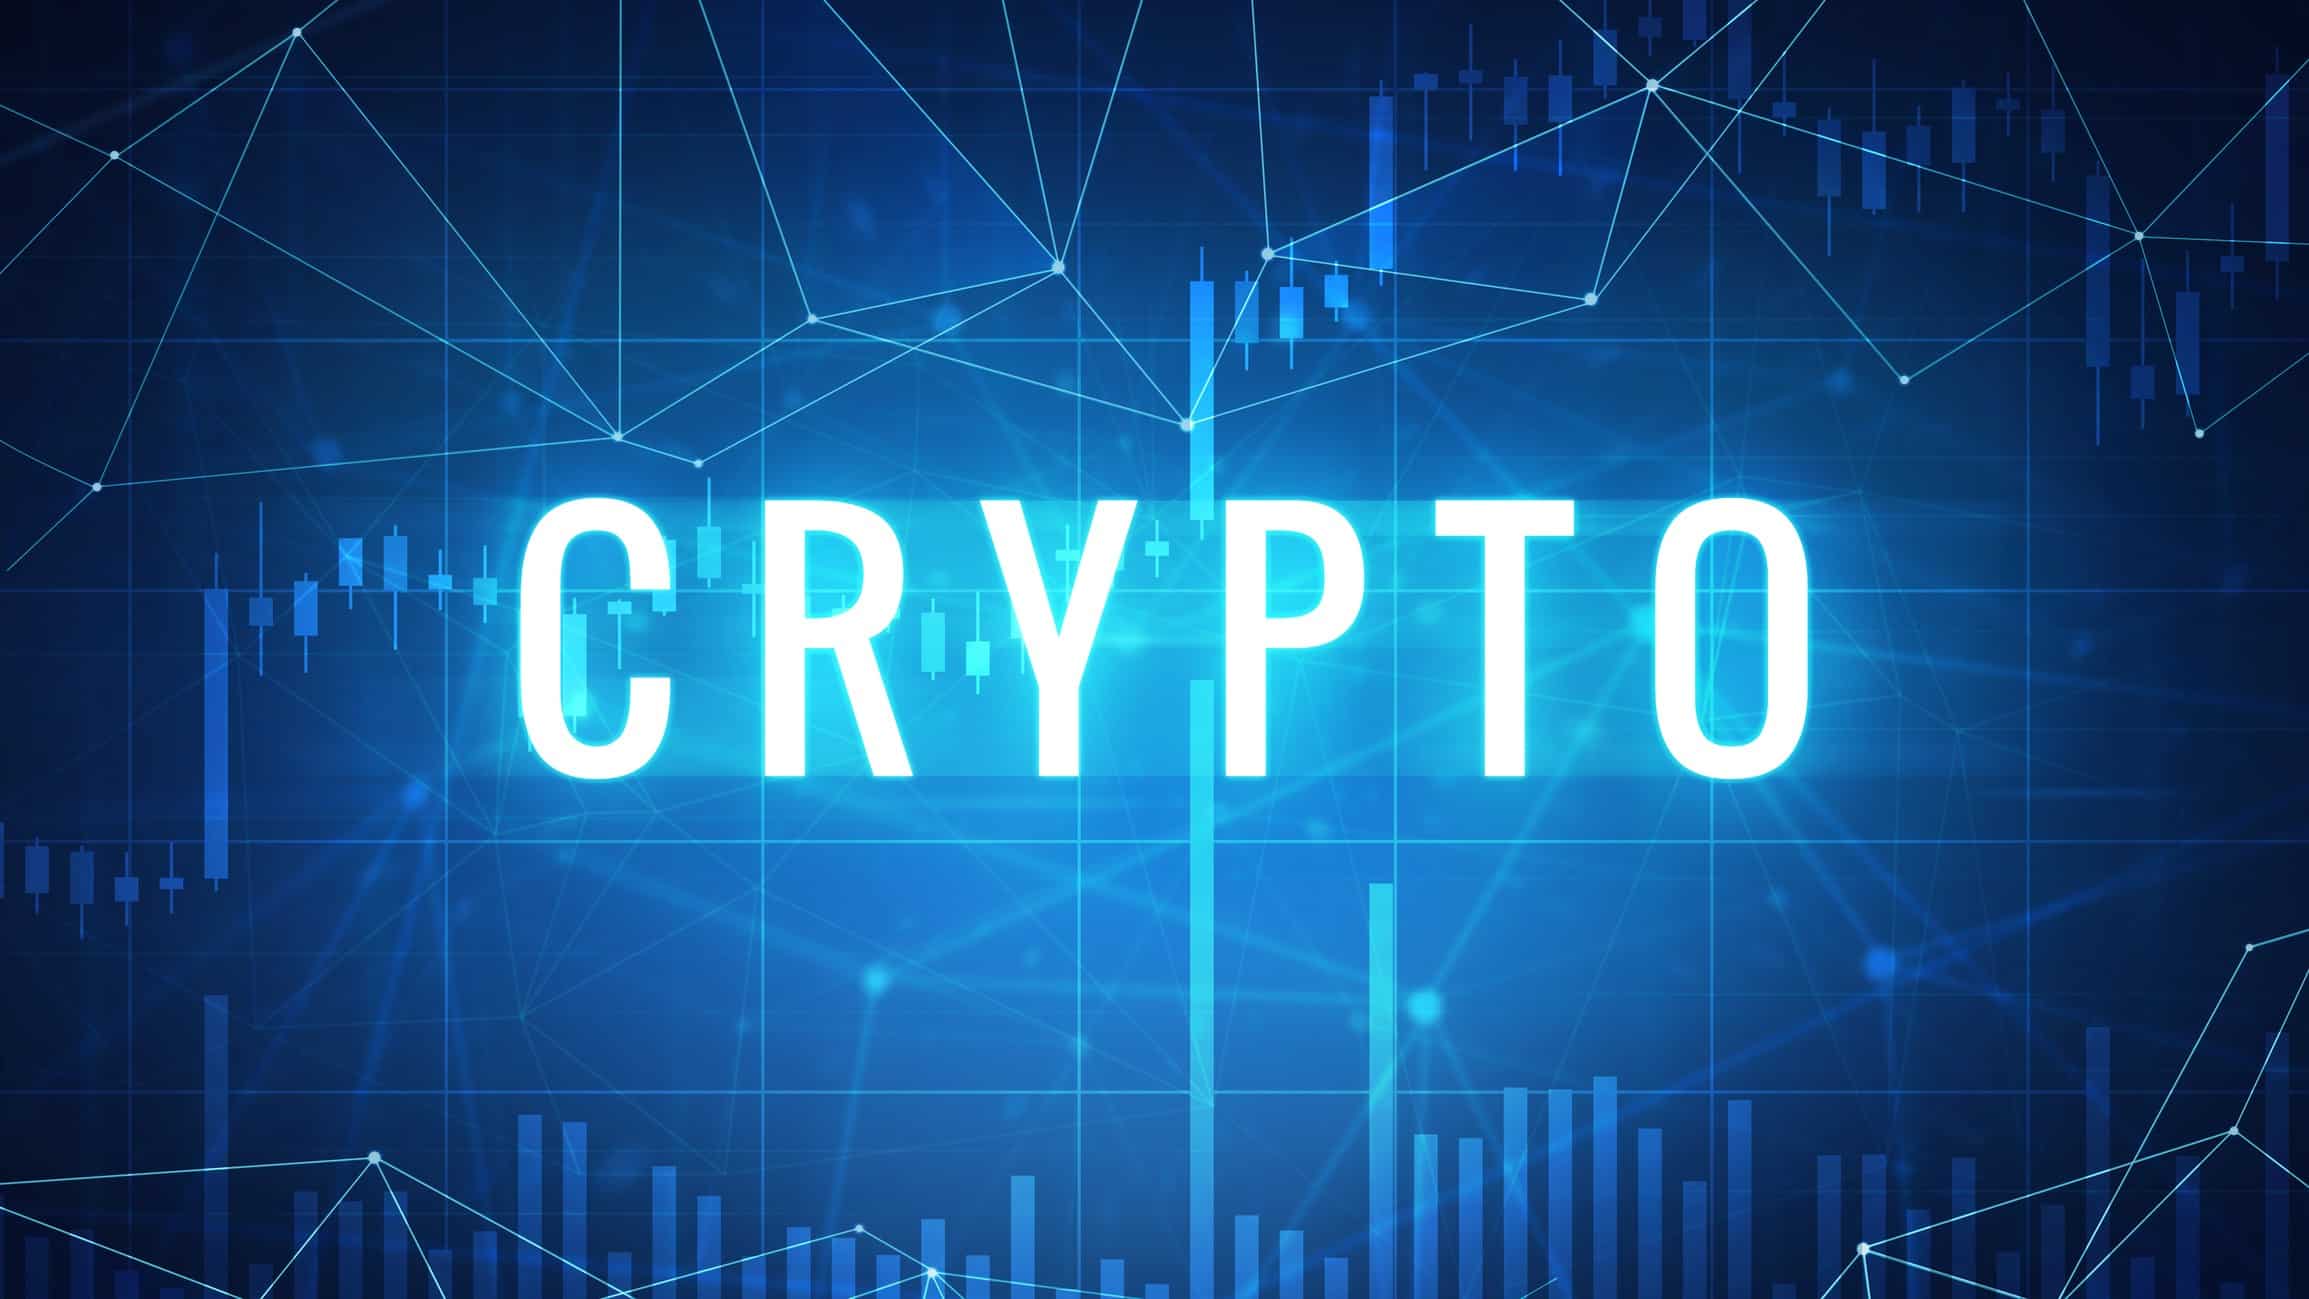 The word crypto spelt out in front of a blue background.